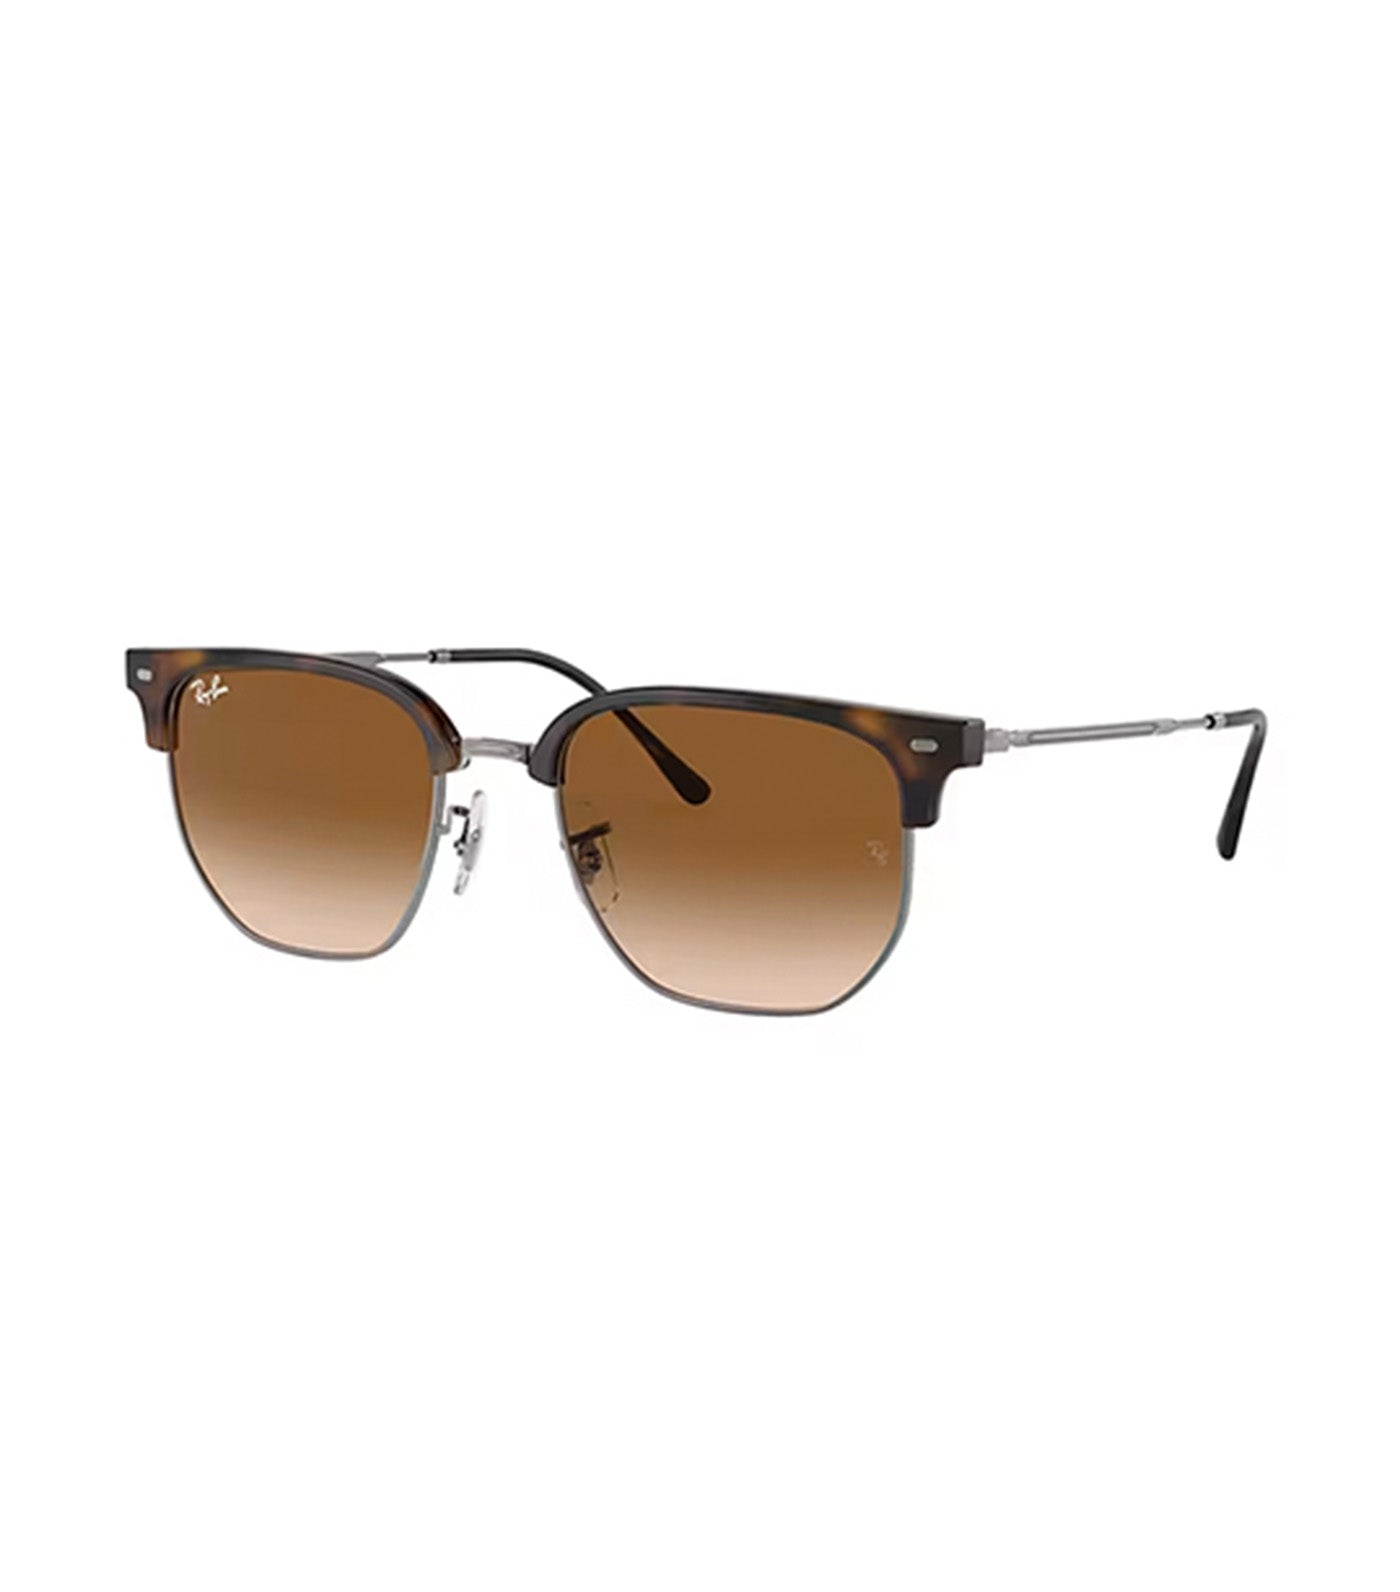 RB4416 New Clubmaster Sunglasses Gunmetal and Brown